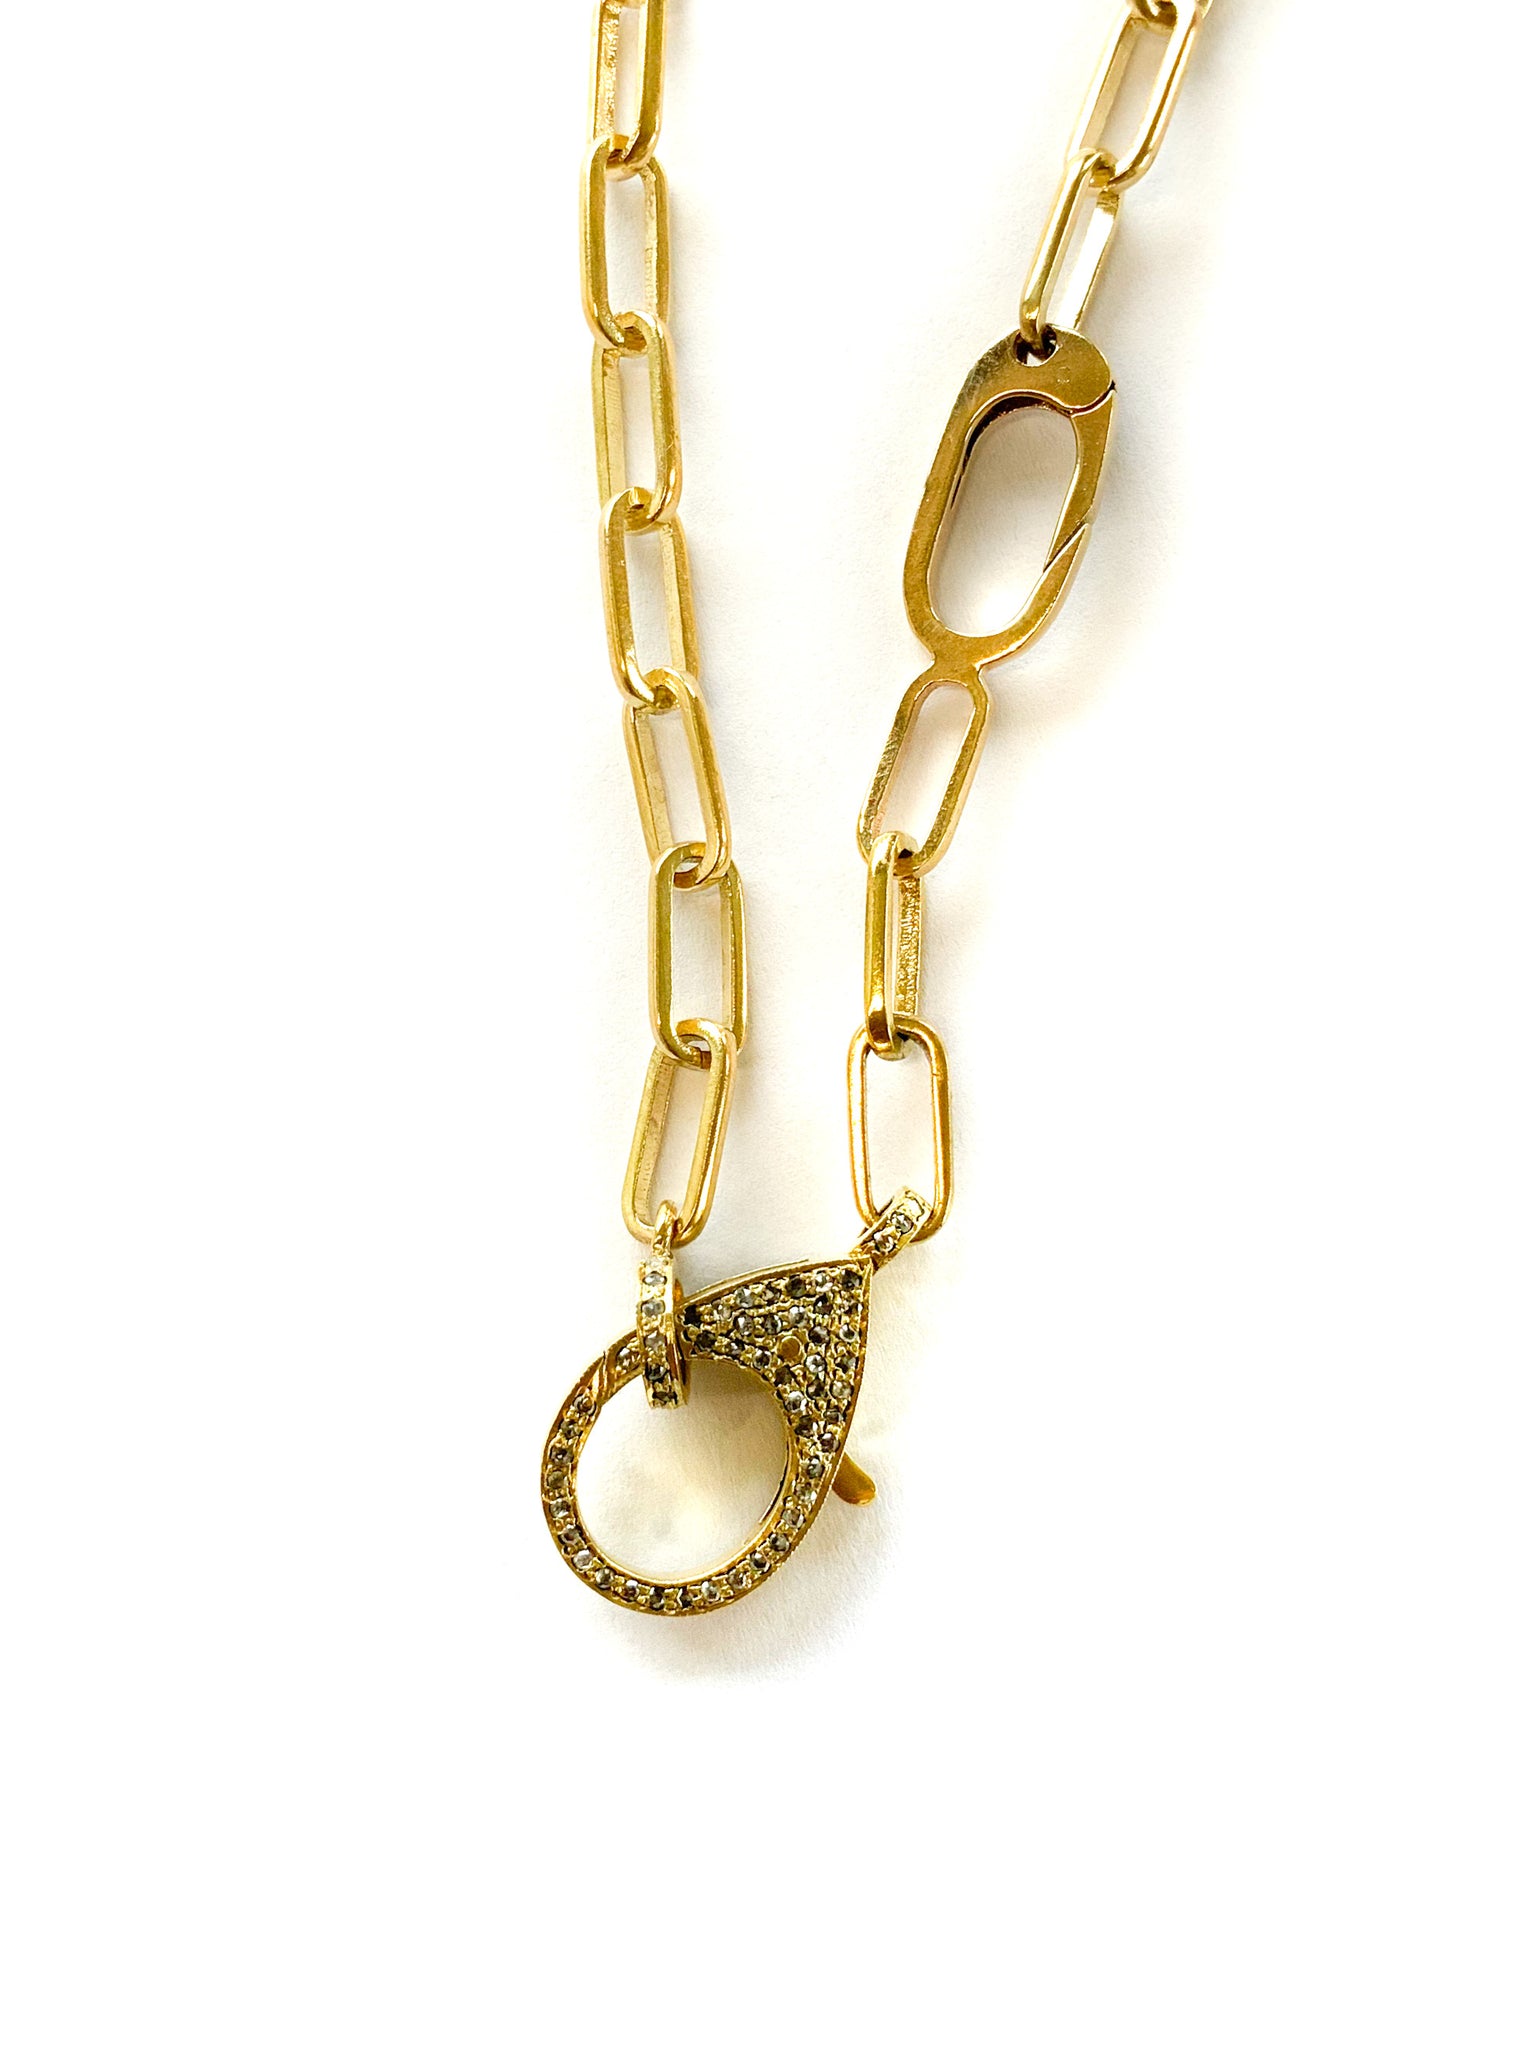 Brass Hidden Double Clip Chain with Pave Diamond Clip and Bale